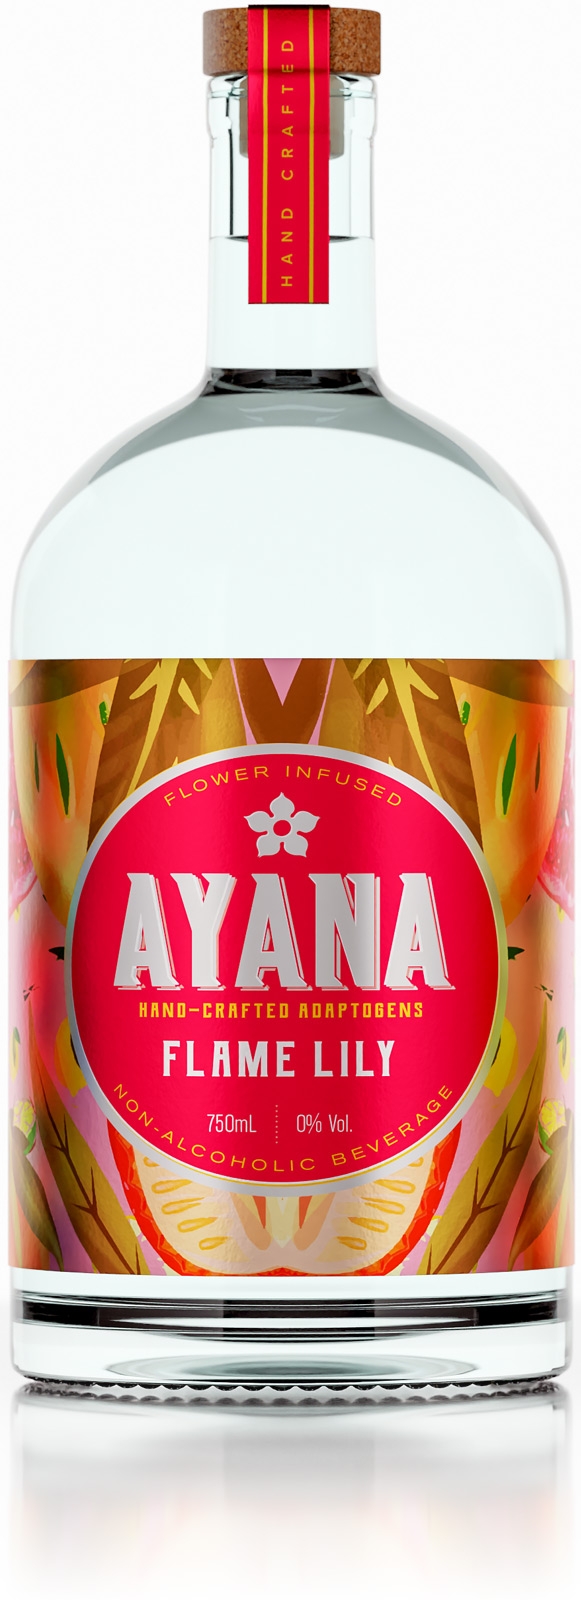 Rendering of Ayans bottle with label design.